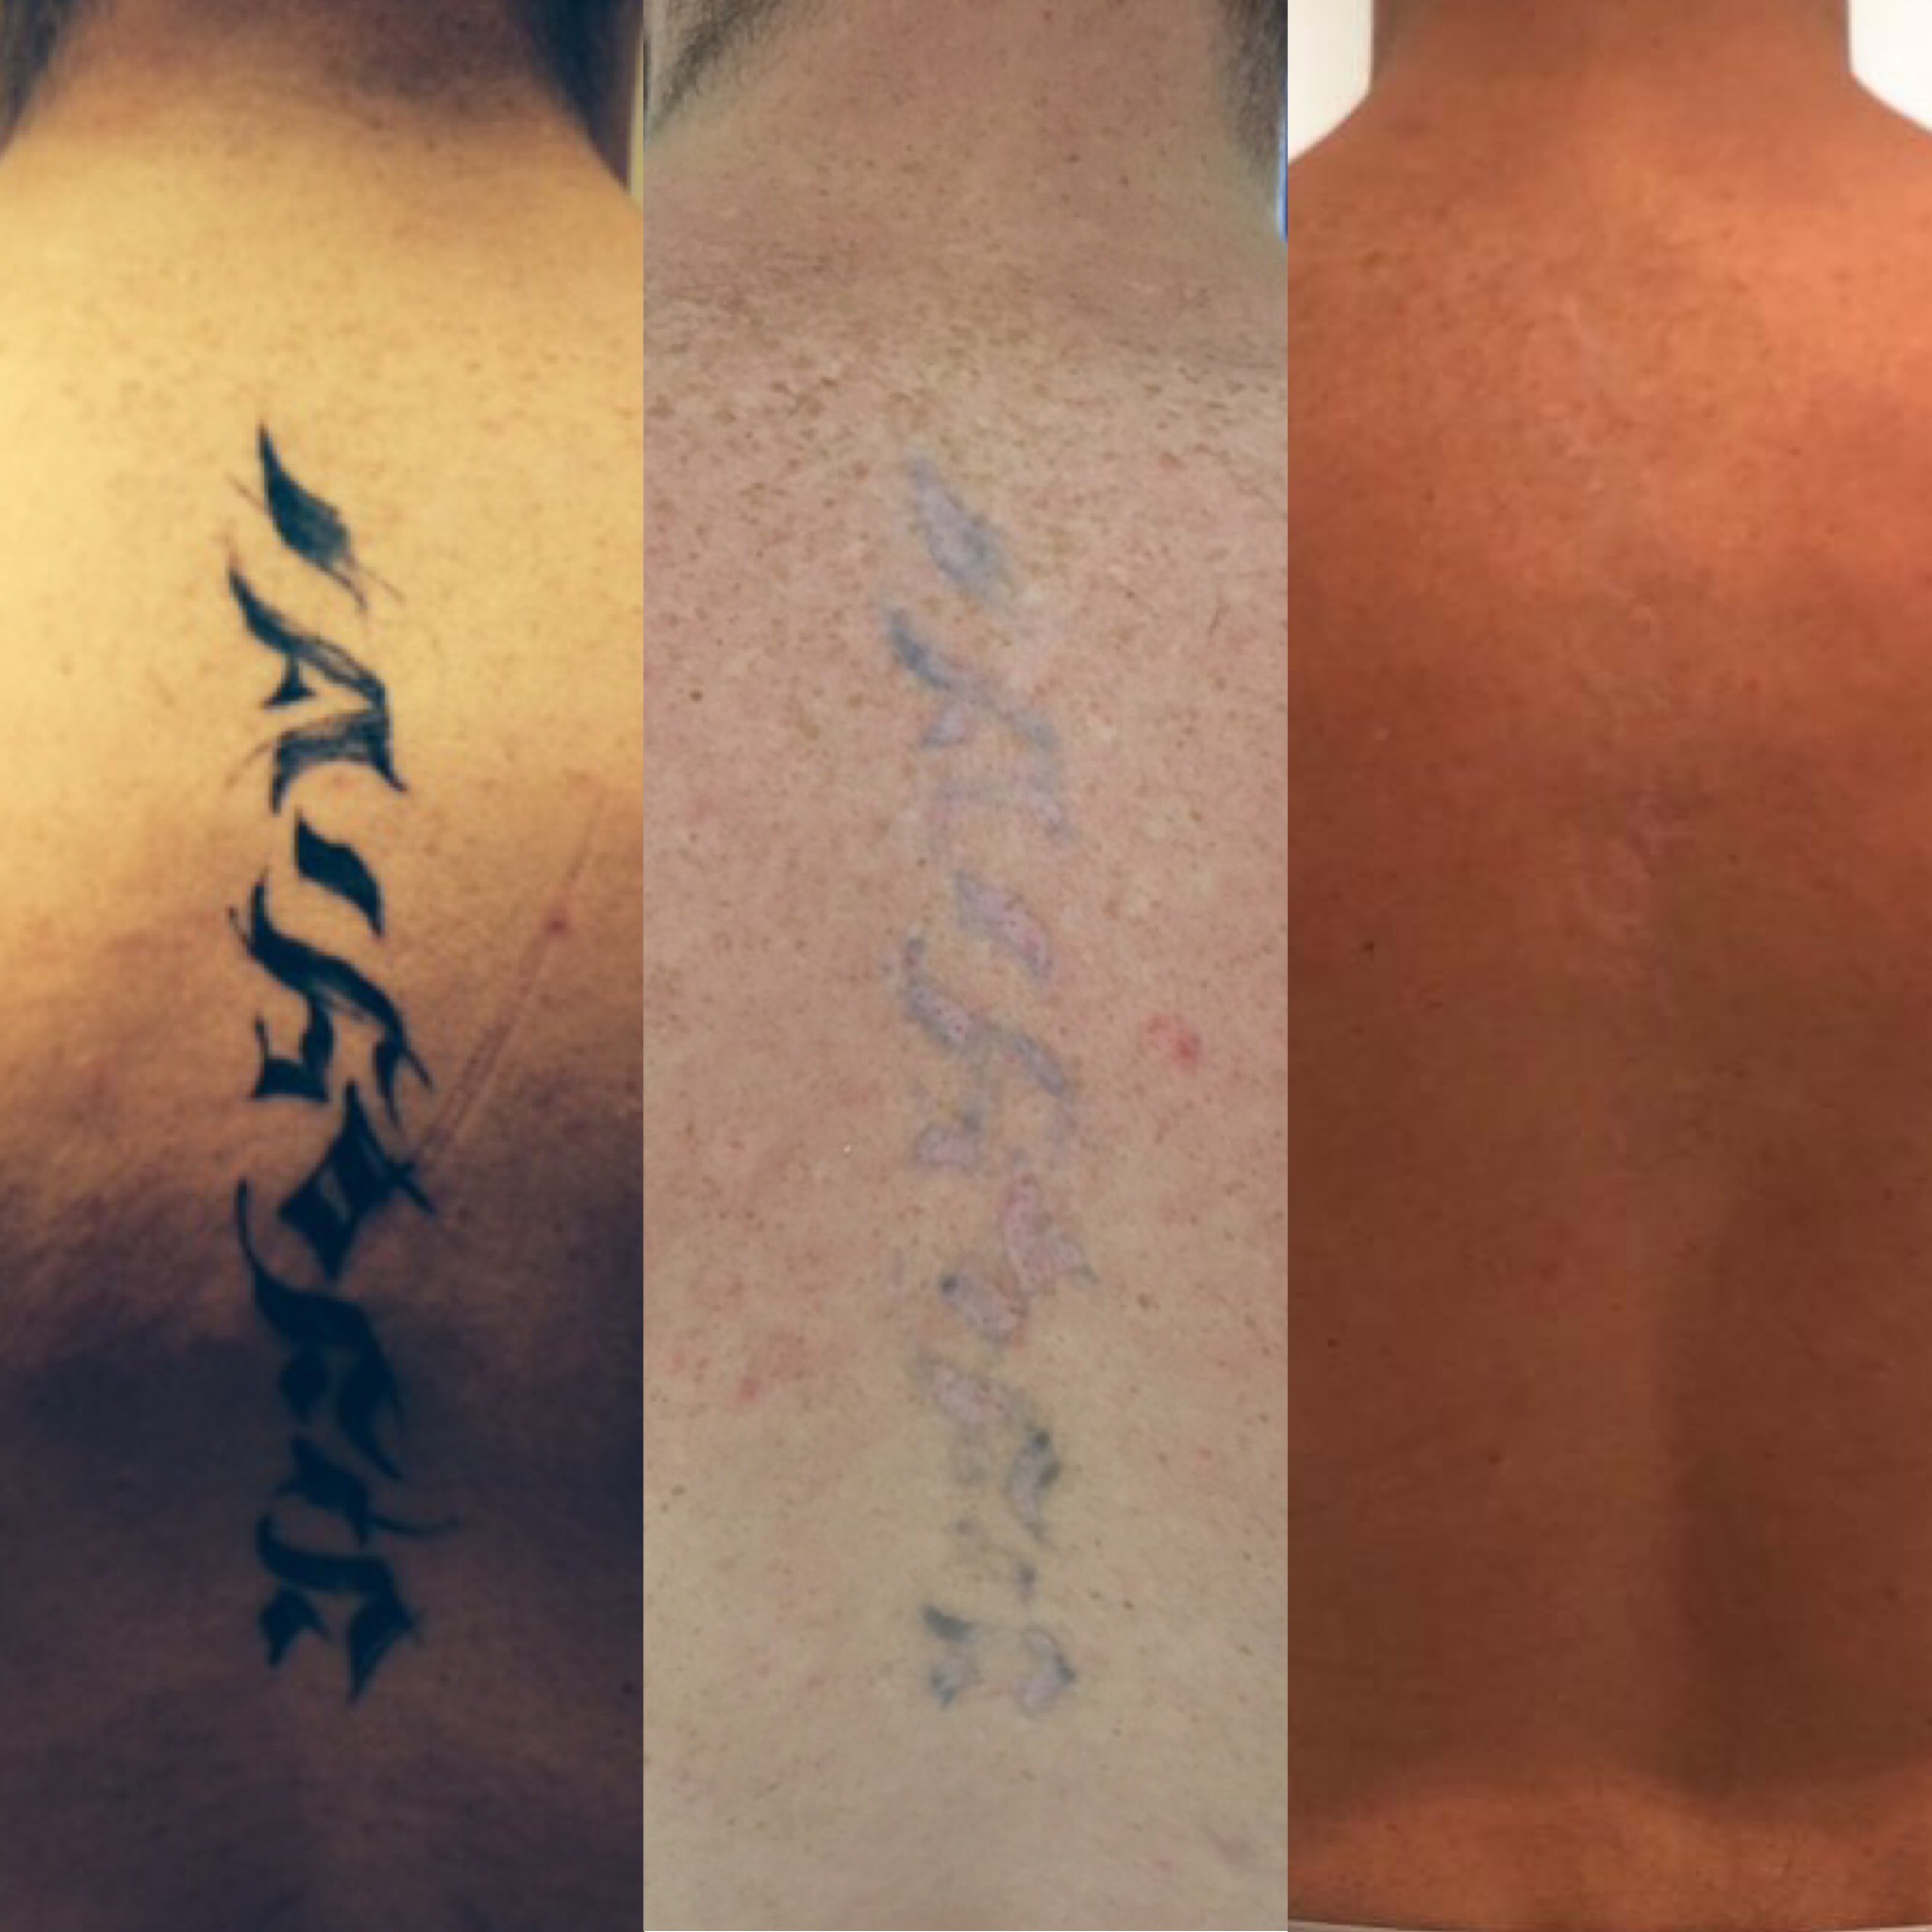 Does Sun Exposure Spoil Laser Tattoo Removal Process